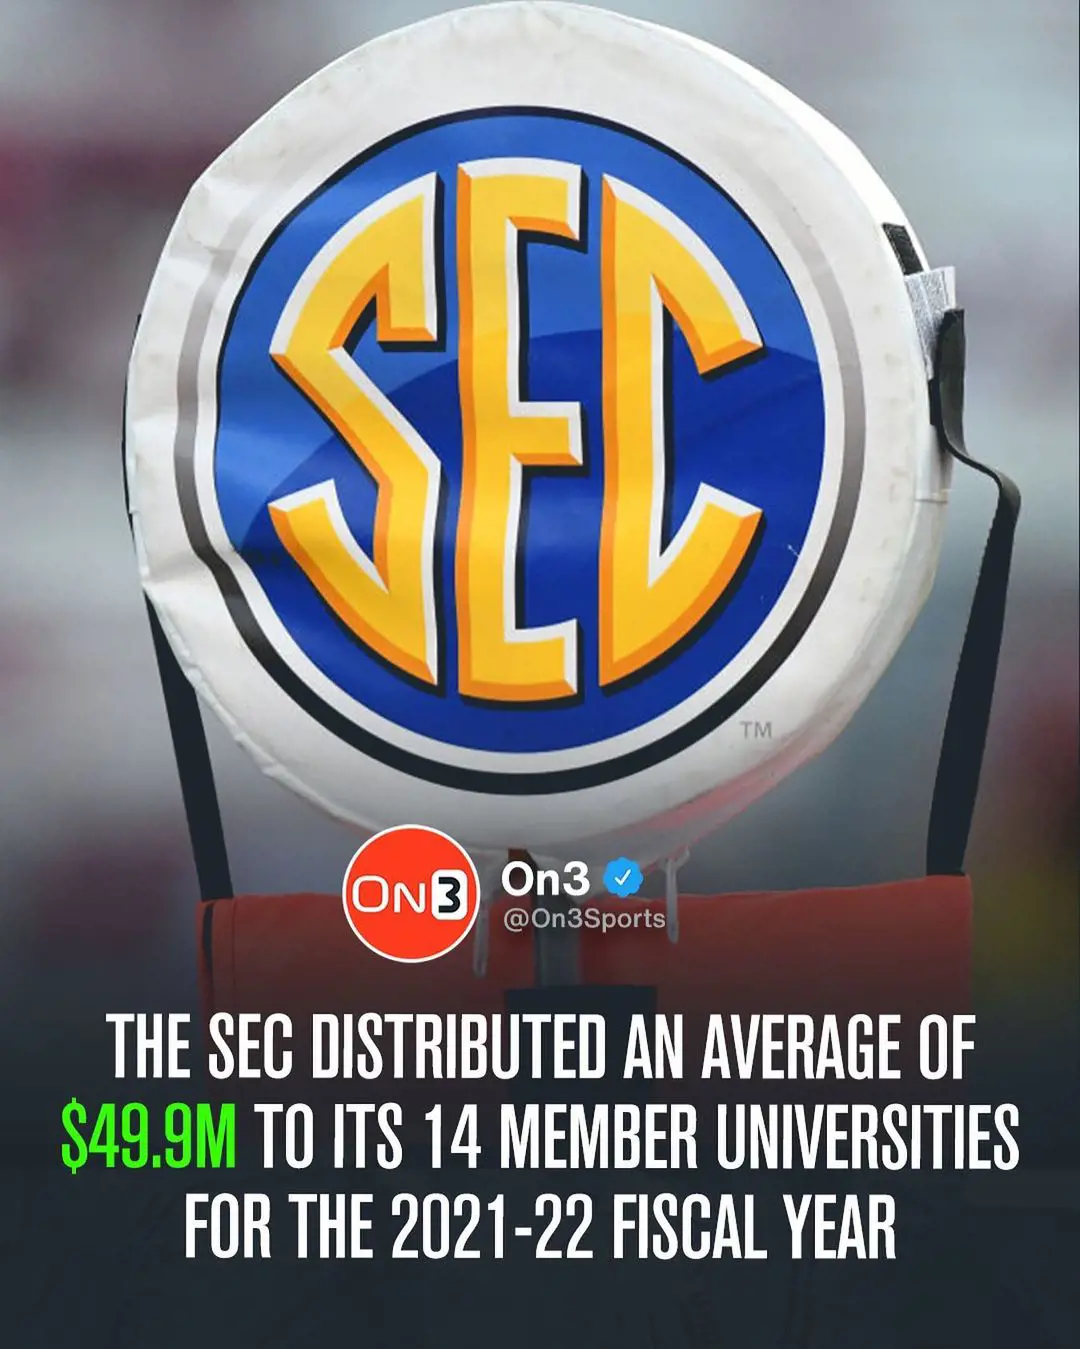 The SEC is growing every year in terms of total revenue earnings.